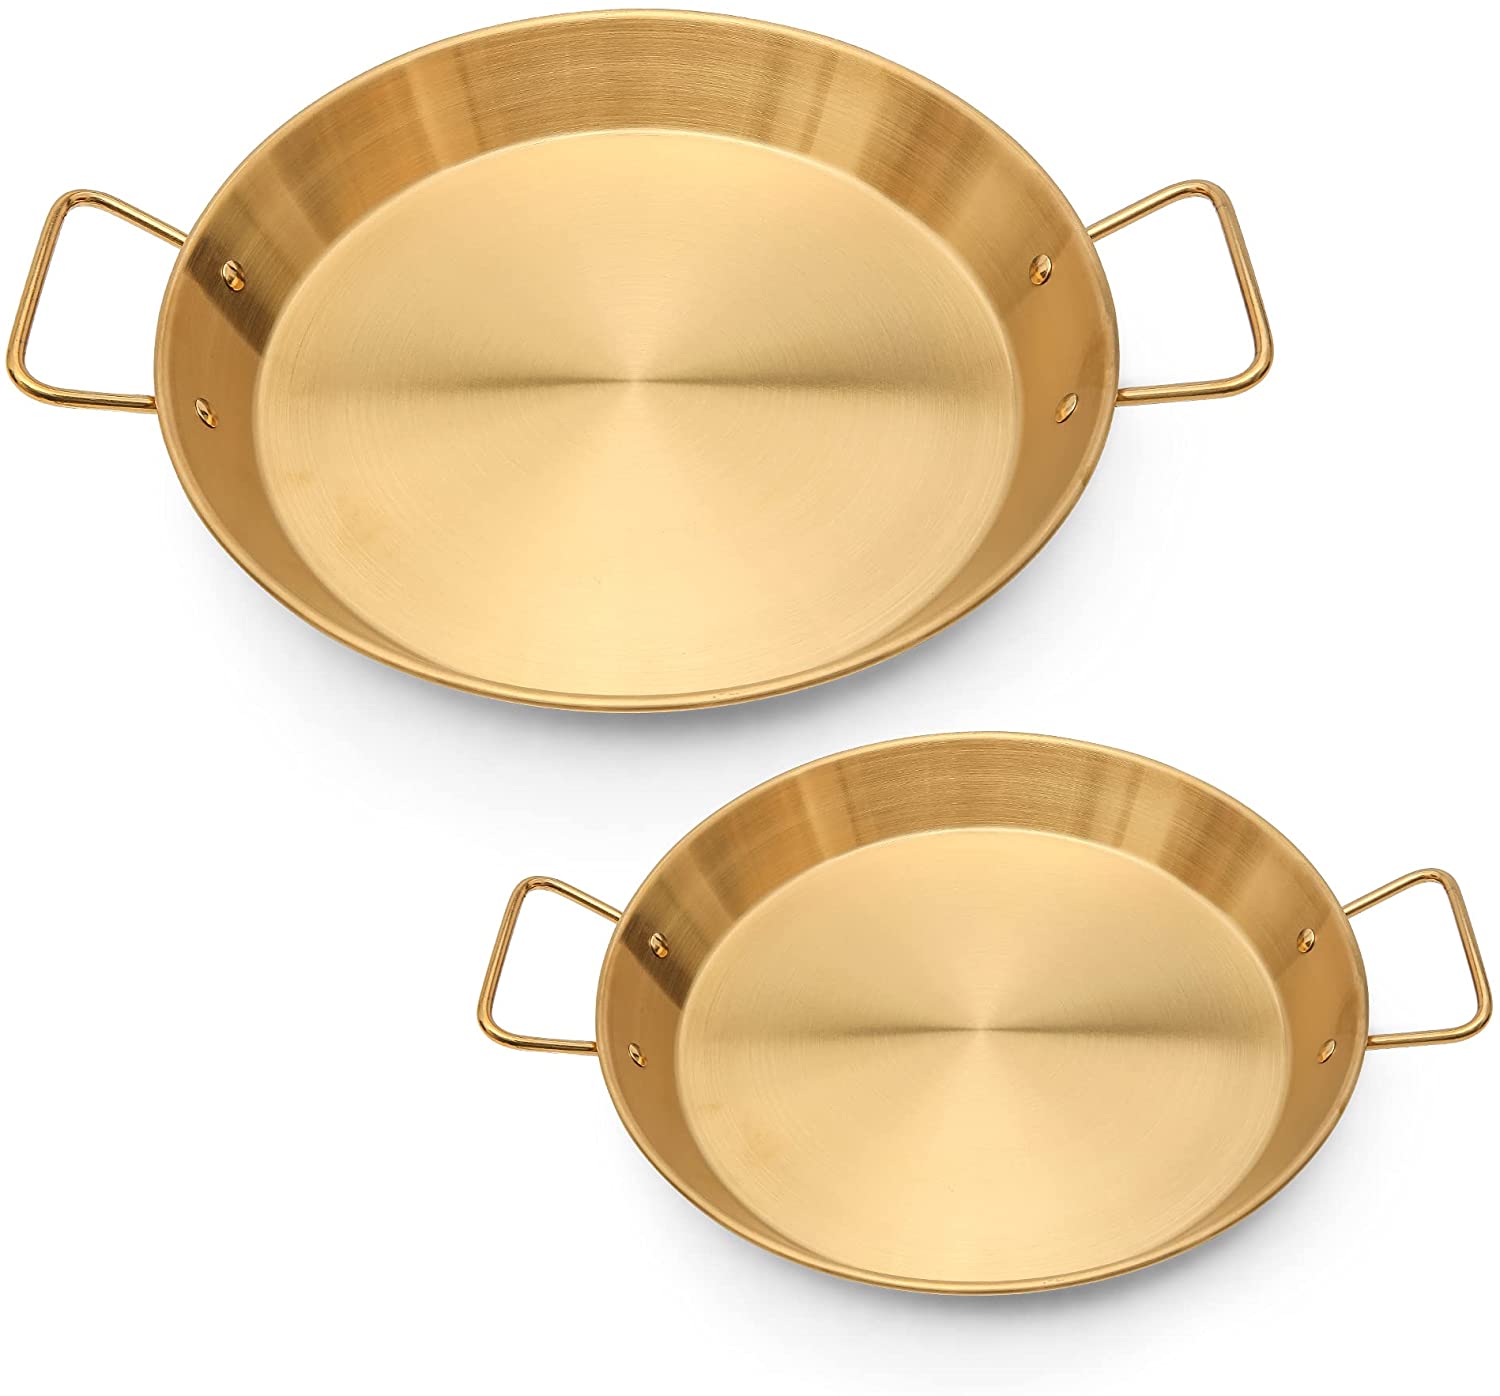 (Out of Stock) Set of 2 Display Salad Bowl Decorative Bowl, Gold Fruit Bowl, Candy Dish, Gold Centerpiece Bowl for Party